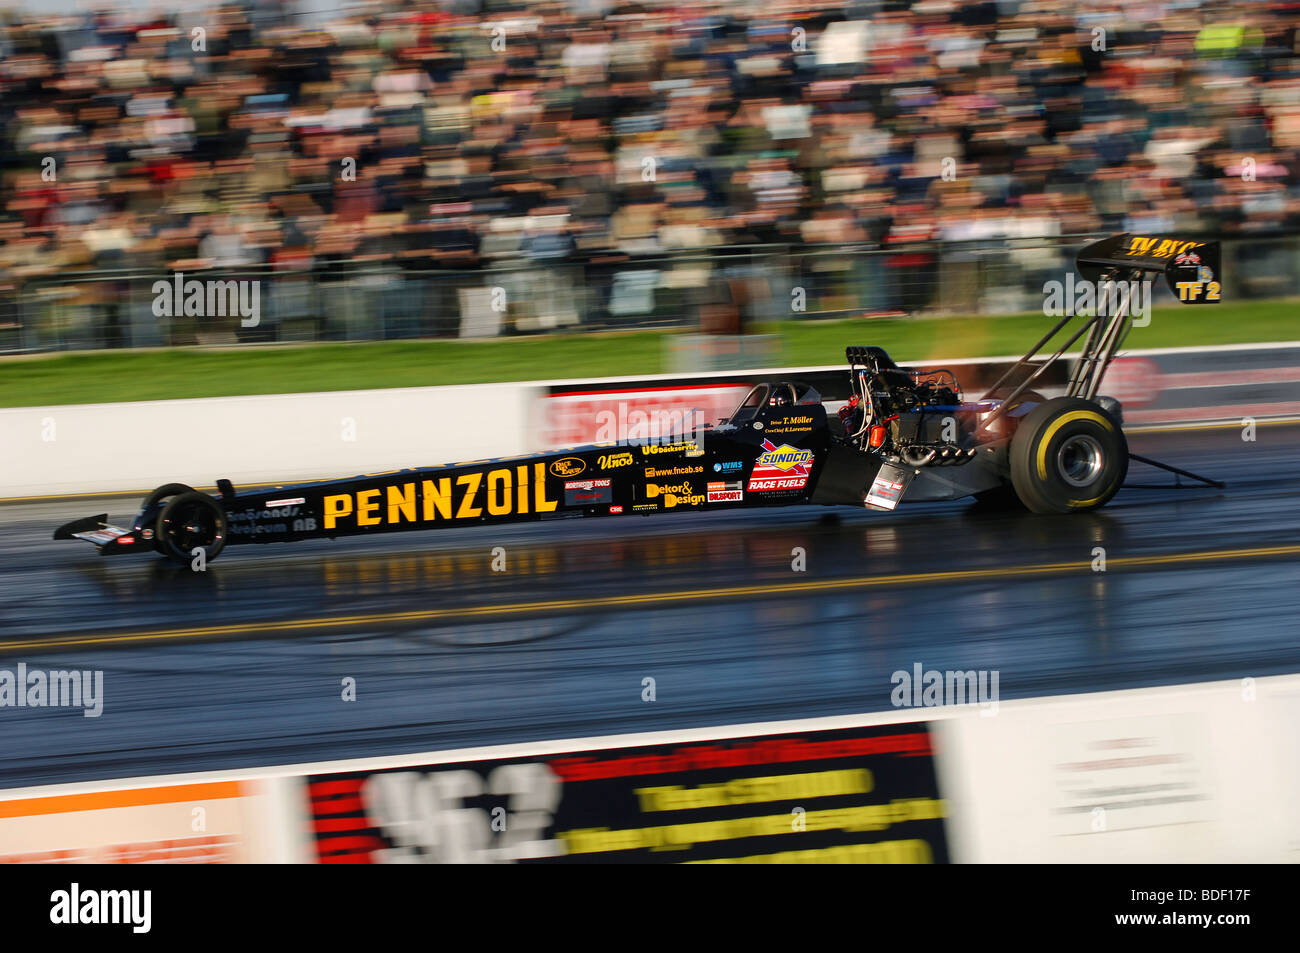 Top fuel dragster Stock Photo